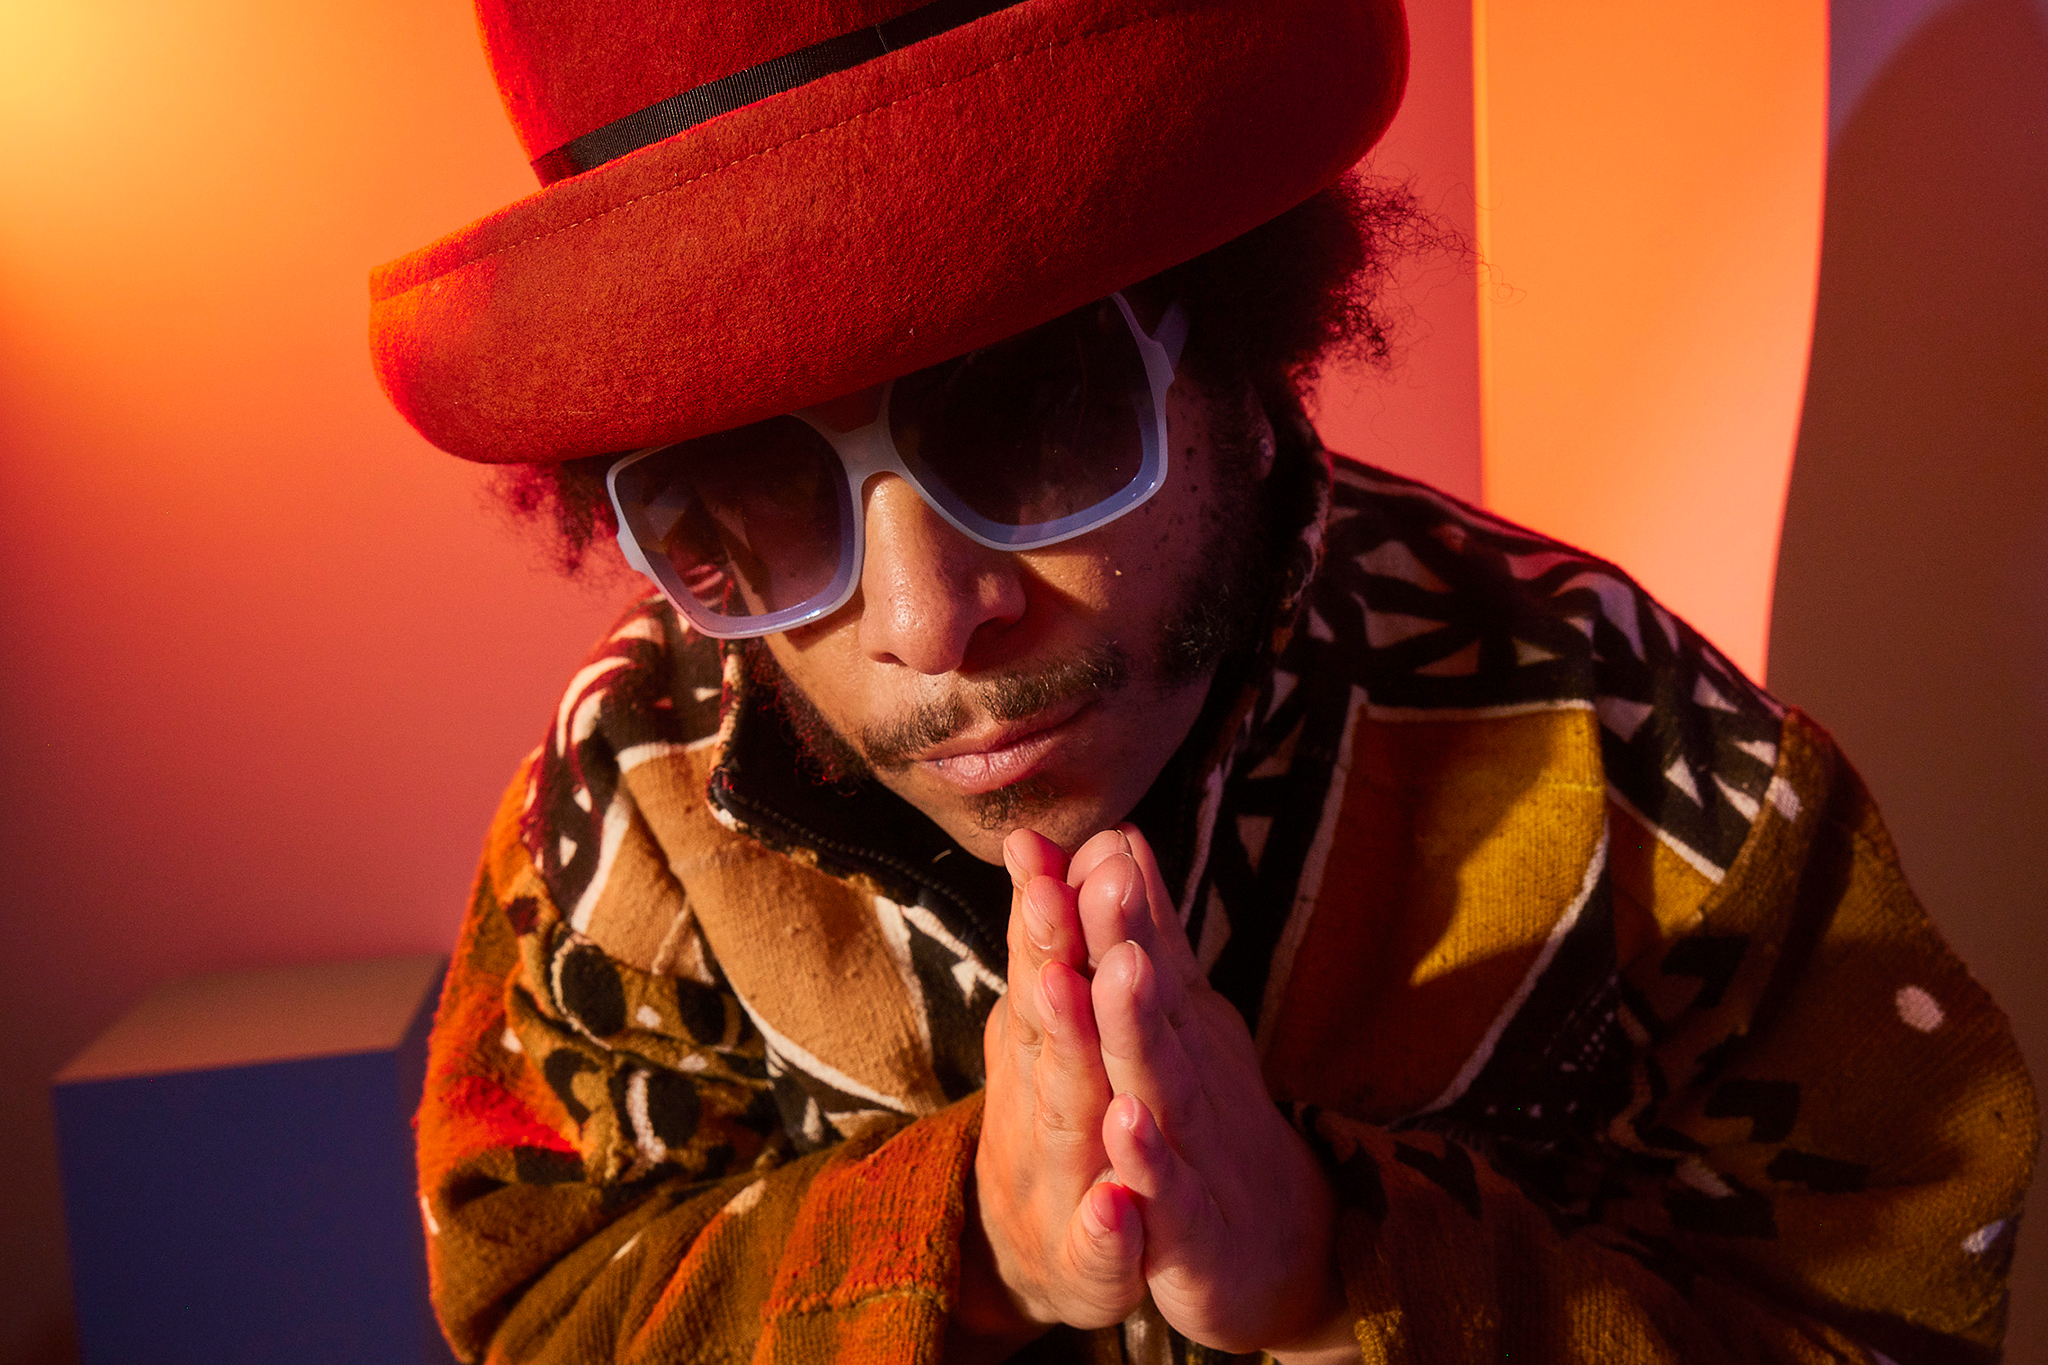 Boots Riley's Anti-Capitalist Revolution Will Be Televised